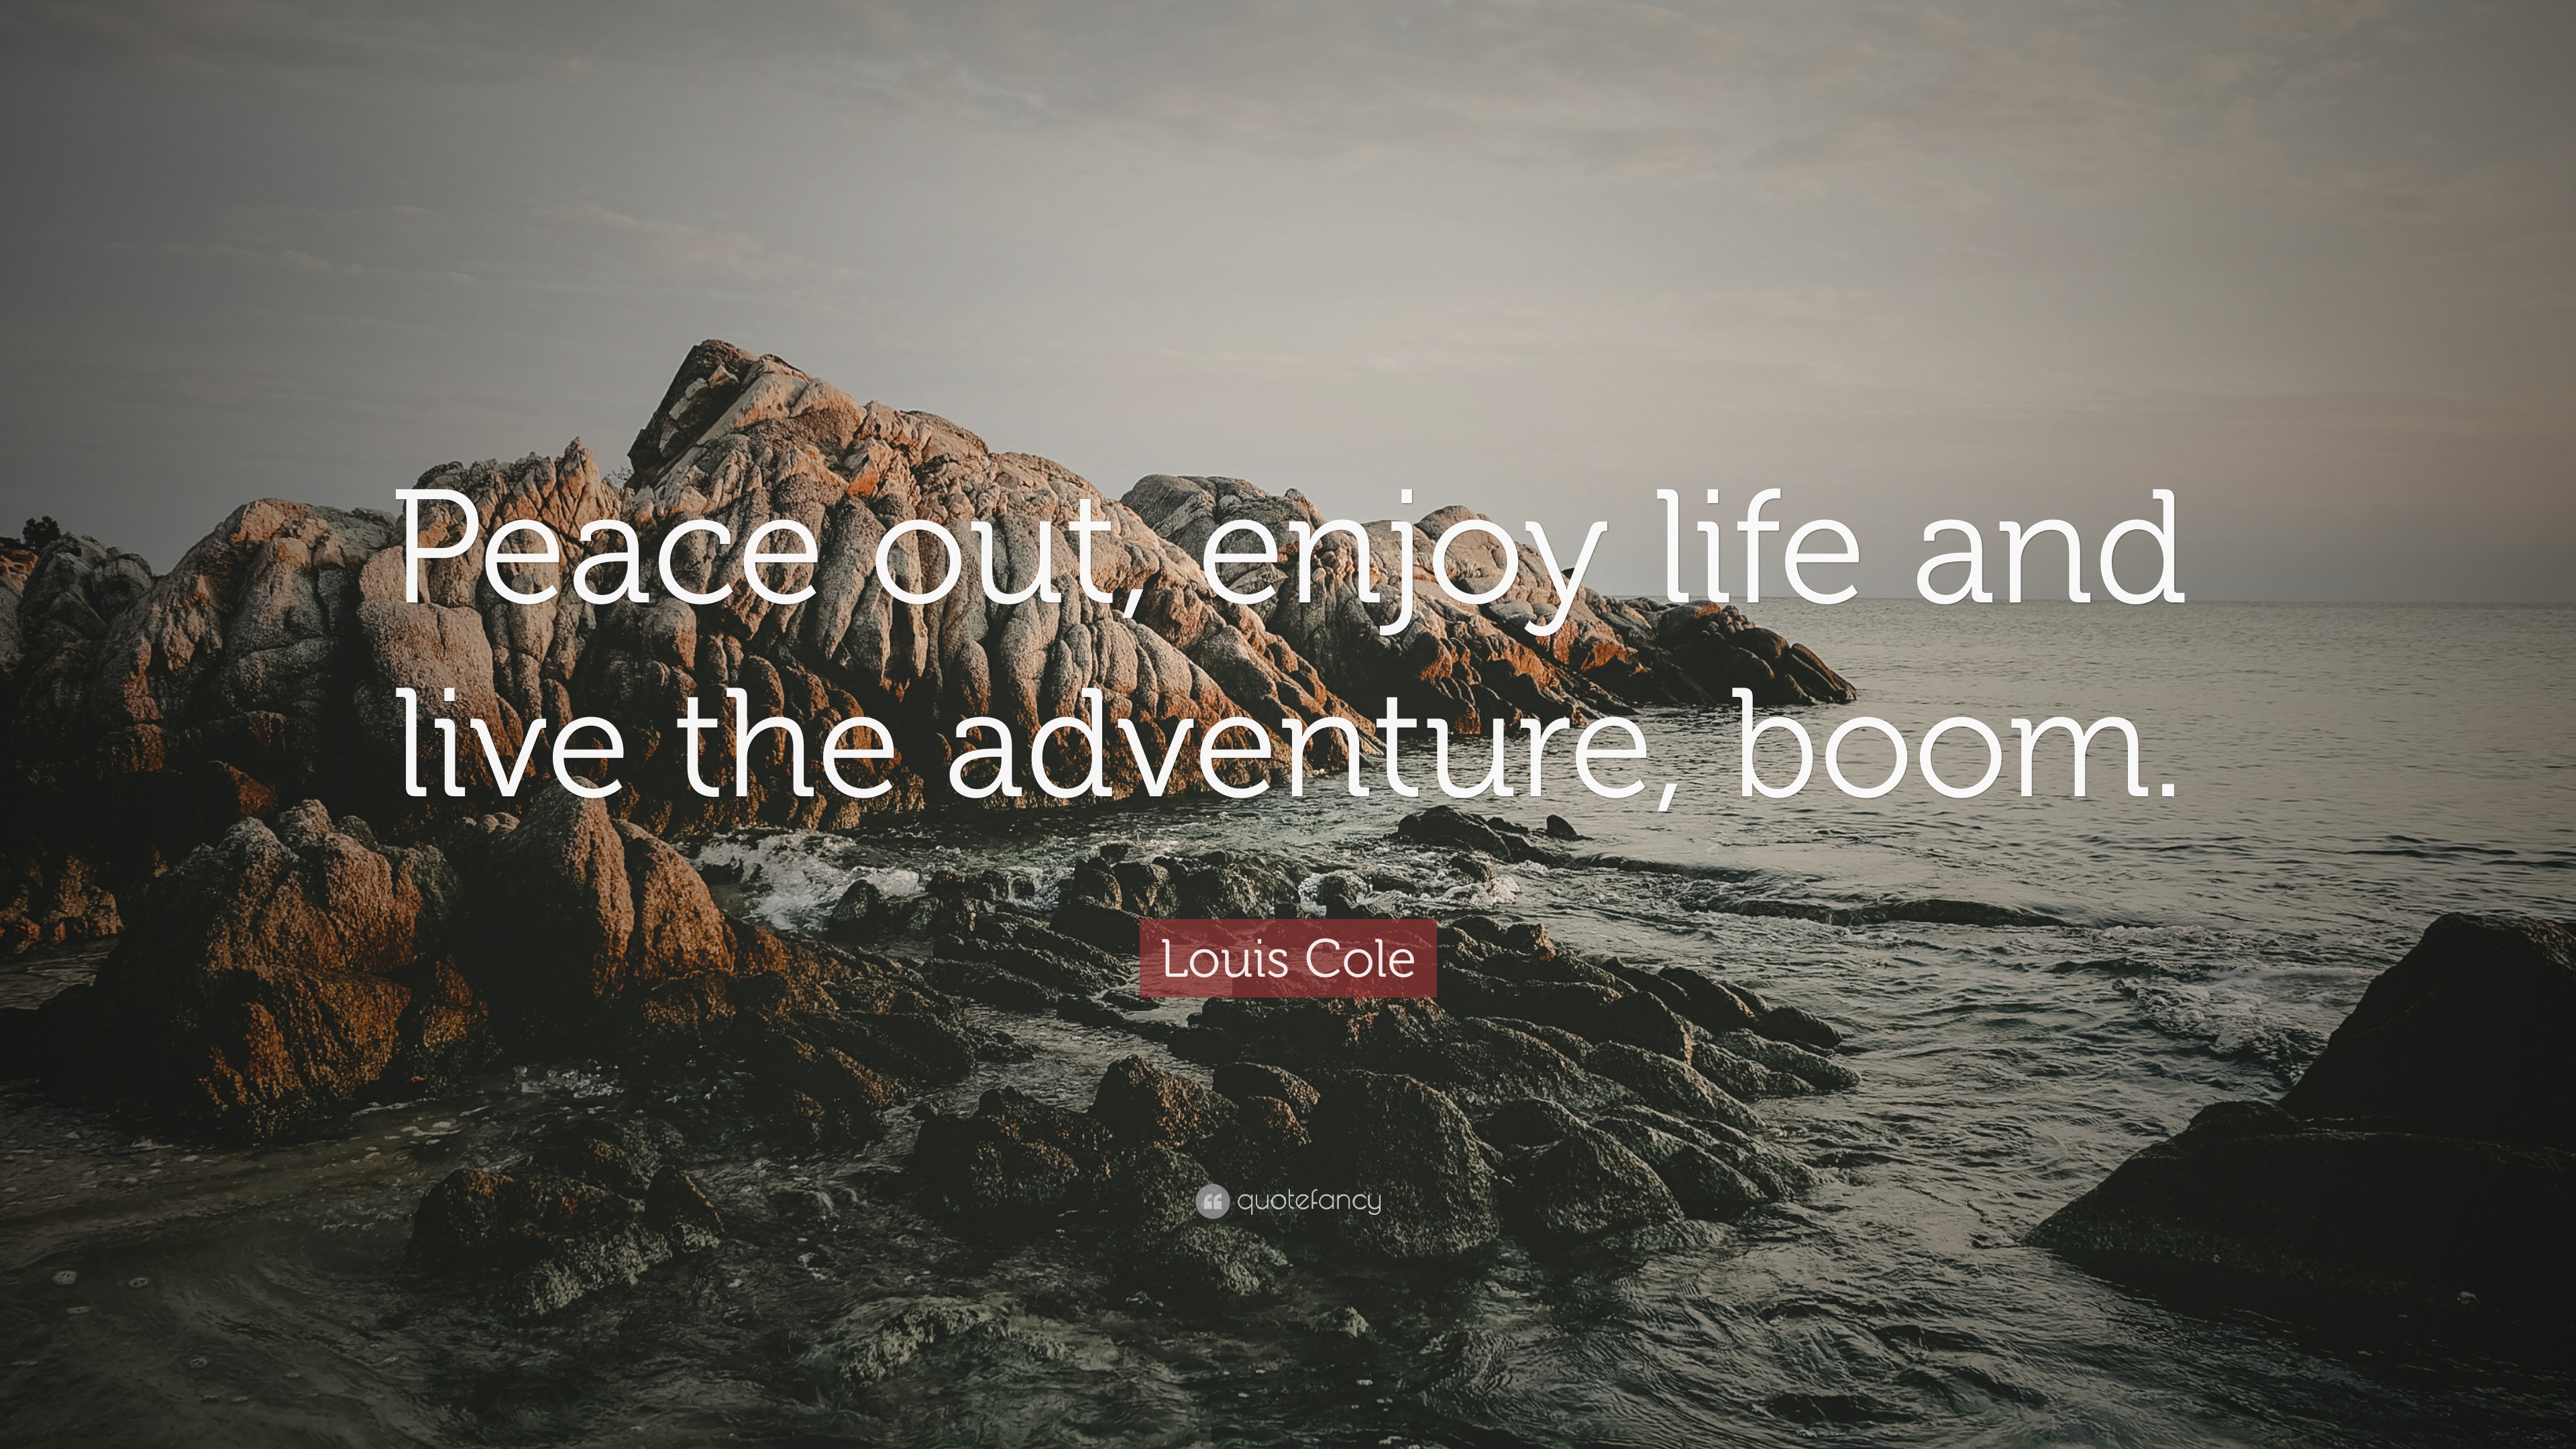 Louis Cole Quote “Peace out enjoy life and live the adventure boom